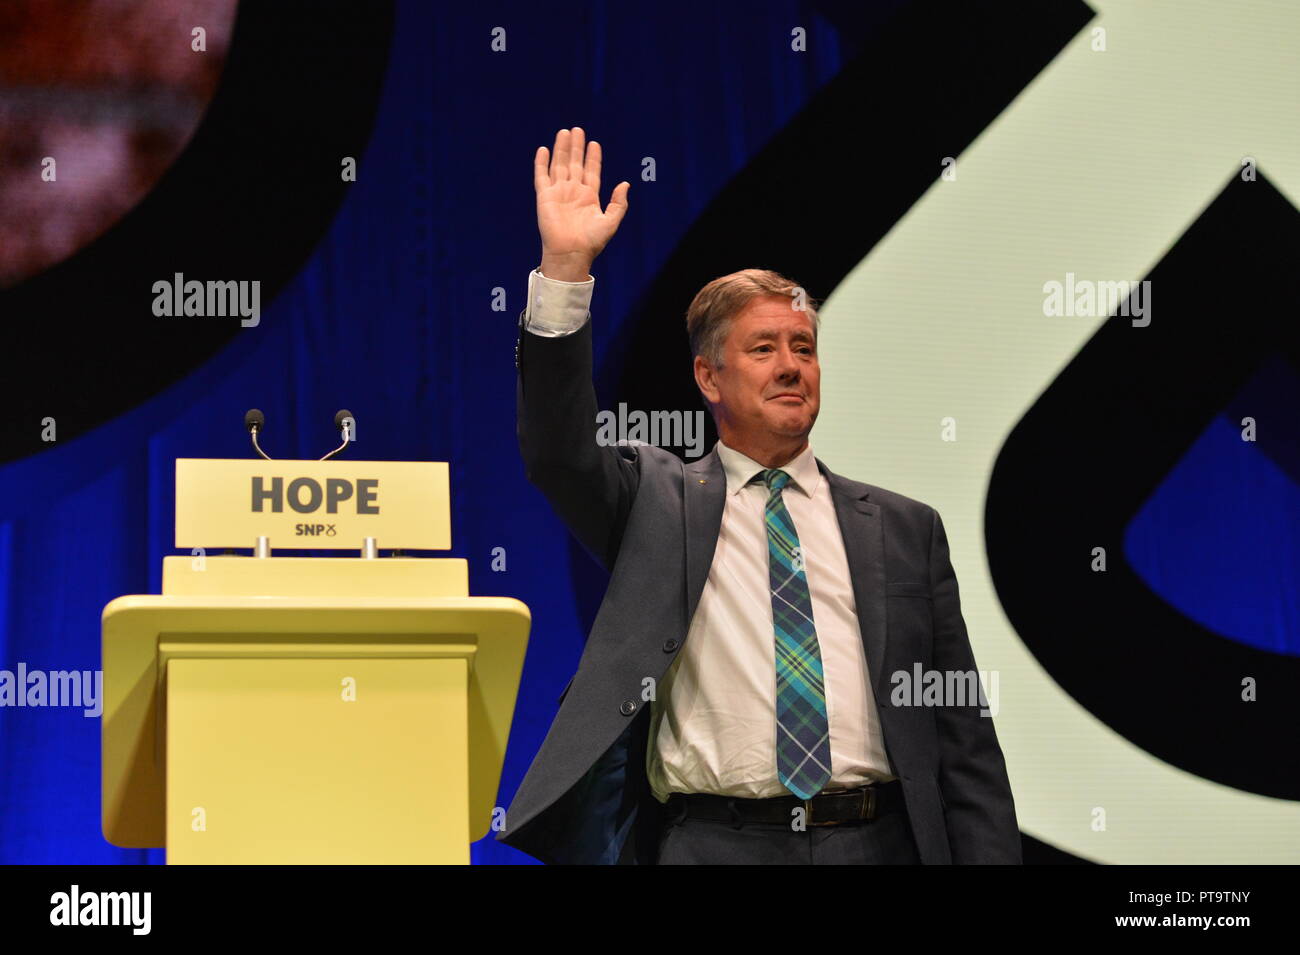 Glasgow, UK. 8th Oct 2018. Keith Brown MSP - Depute leader of the Scottish Nationalist Party giving keynote speech at SNP Annual National Conference, SECC. Credit: Colin Fisher/Alamy Live News Stock Photo